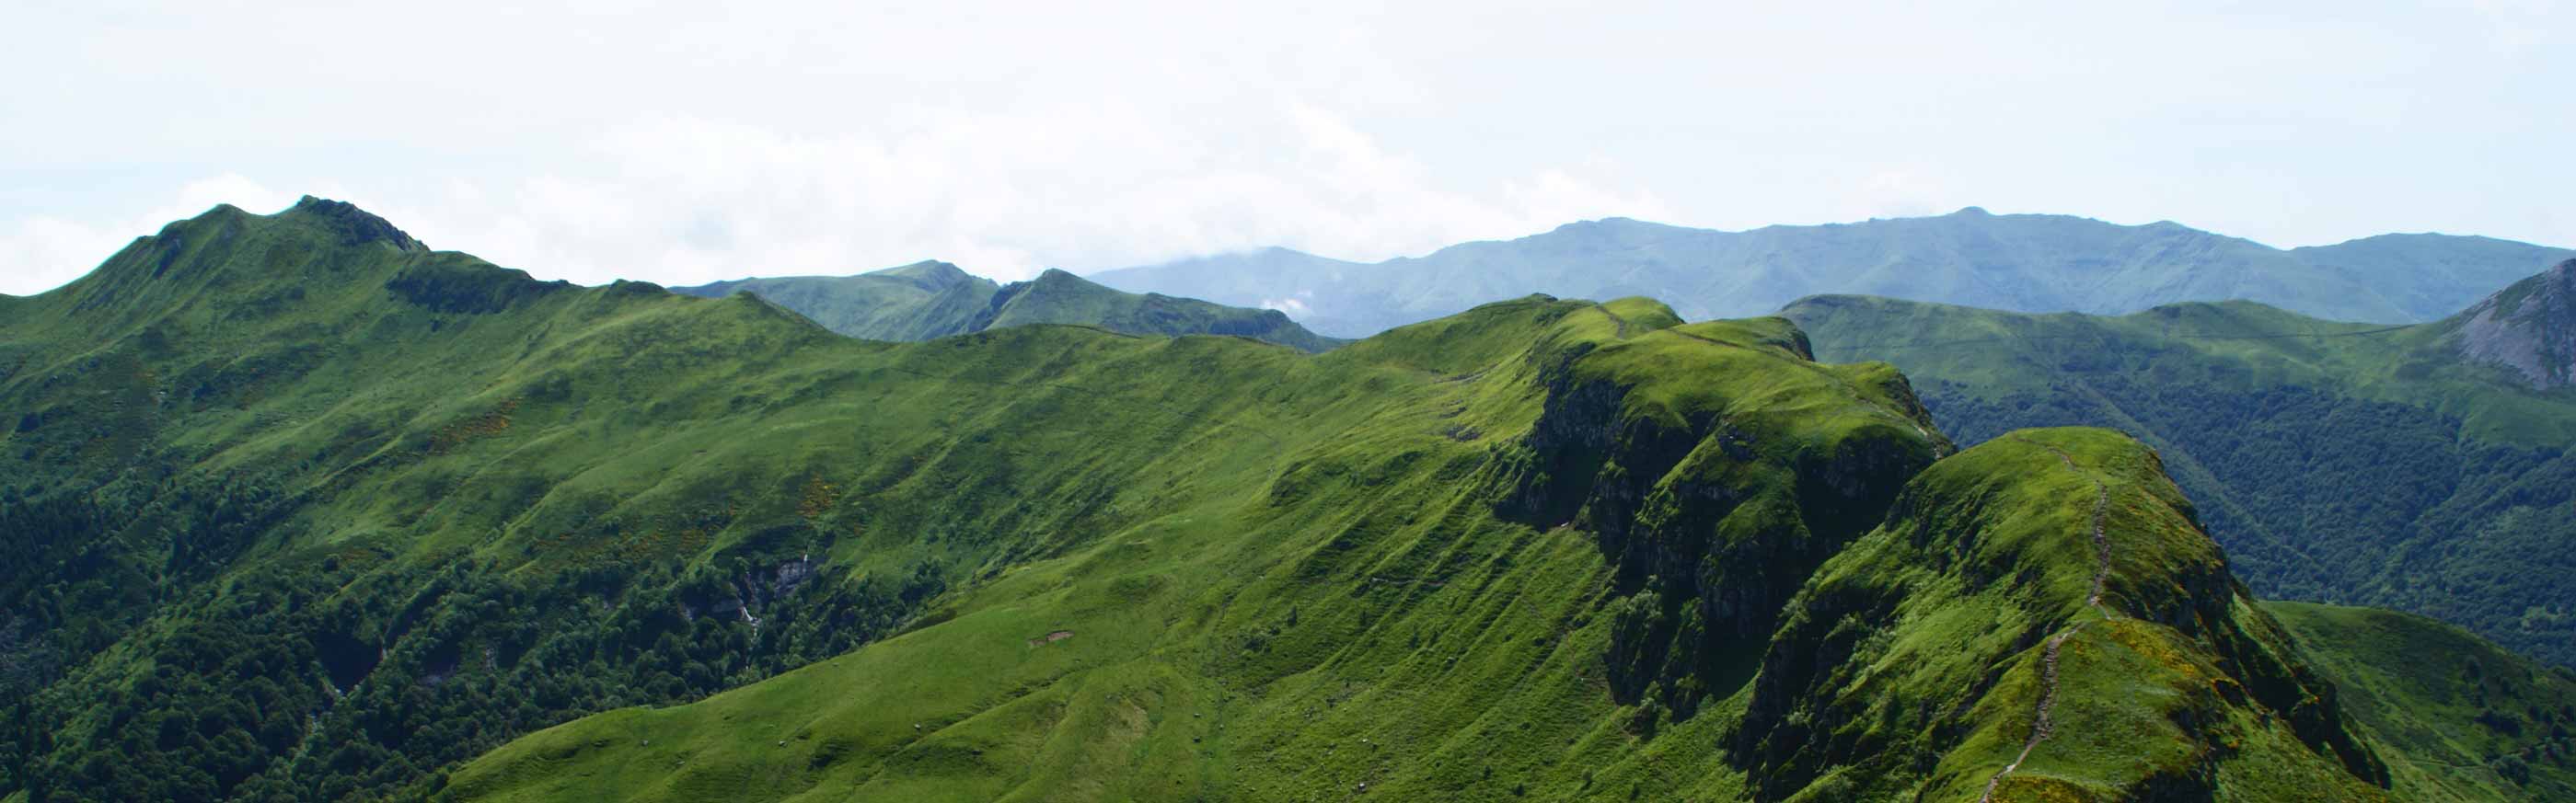 paysage cantal volcan auvergne